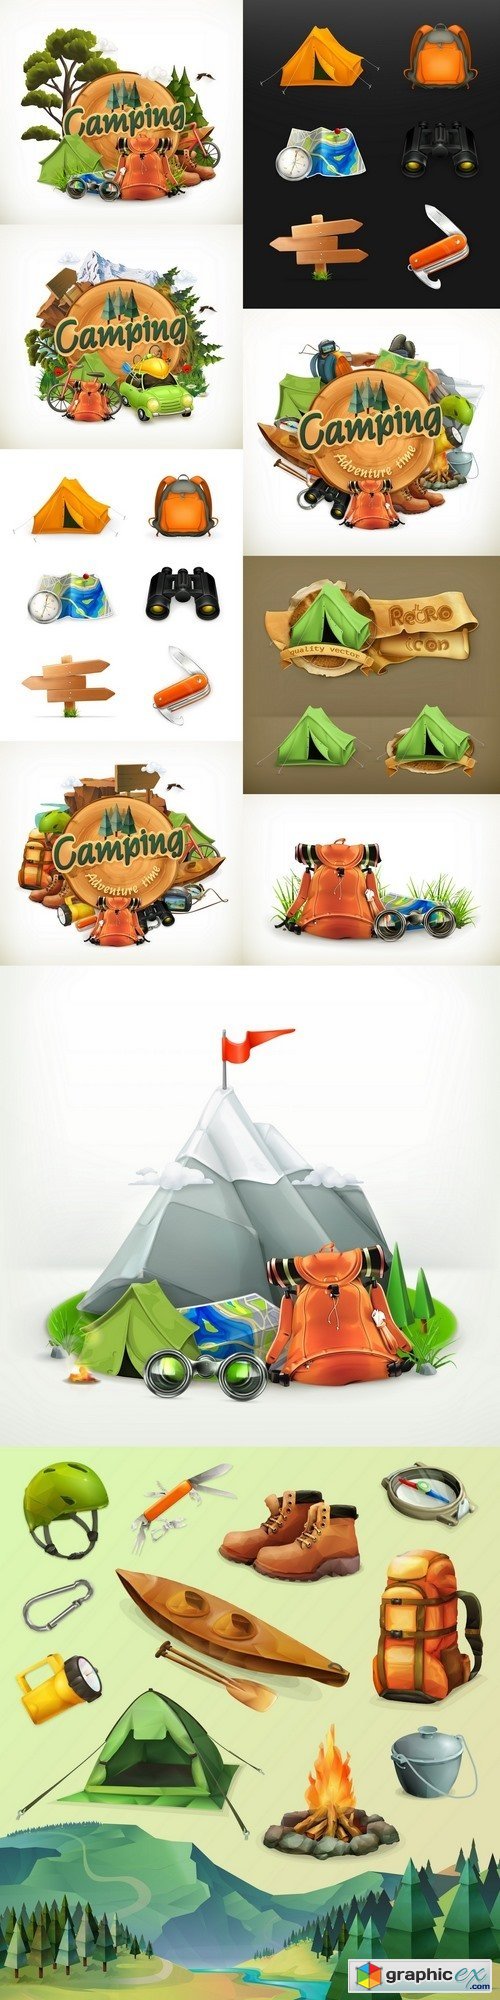 Camping. Adventure time